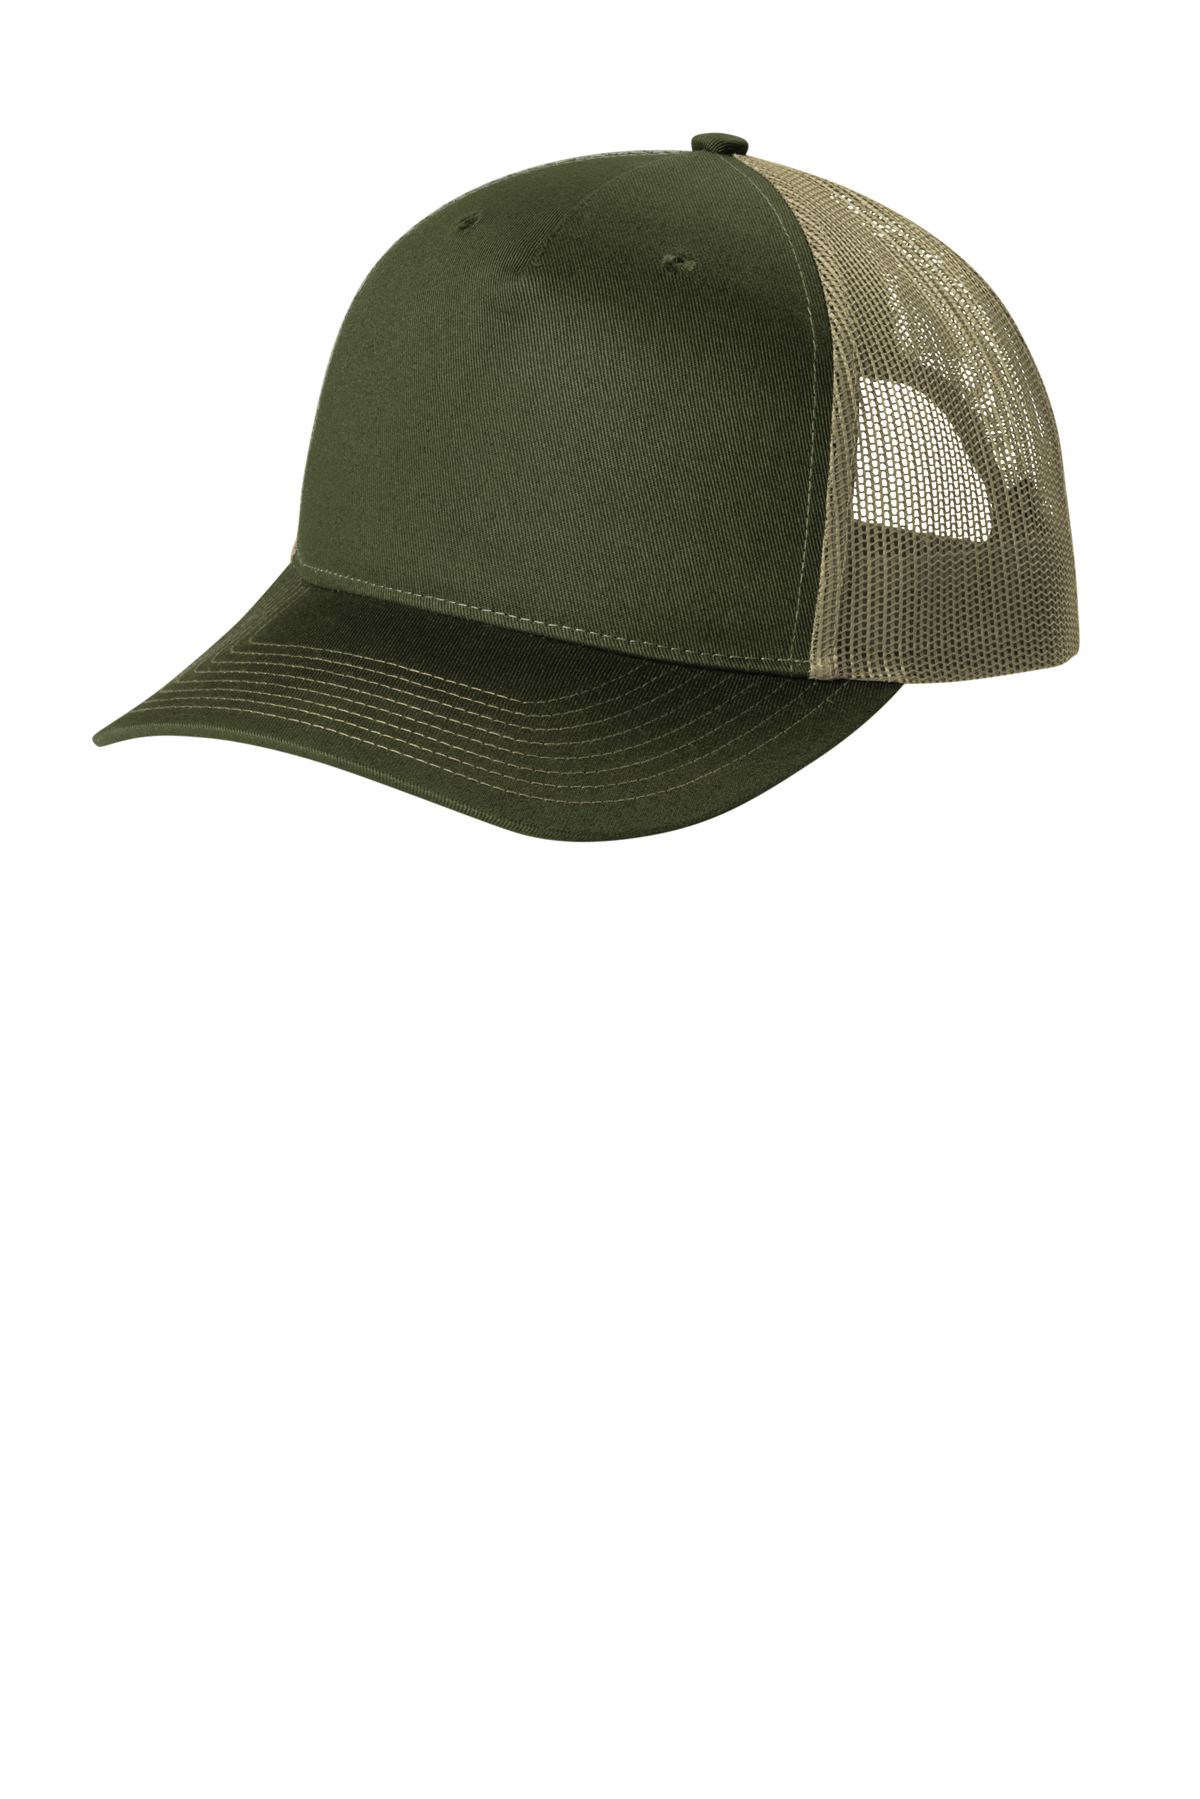 click to view Olive Drab Green/ Tan